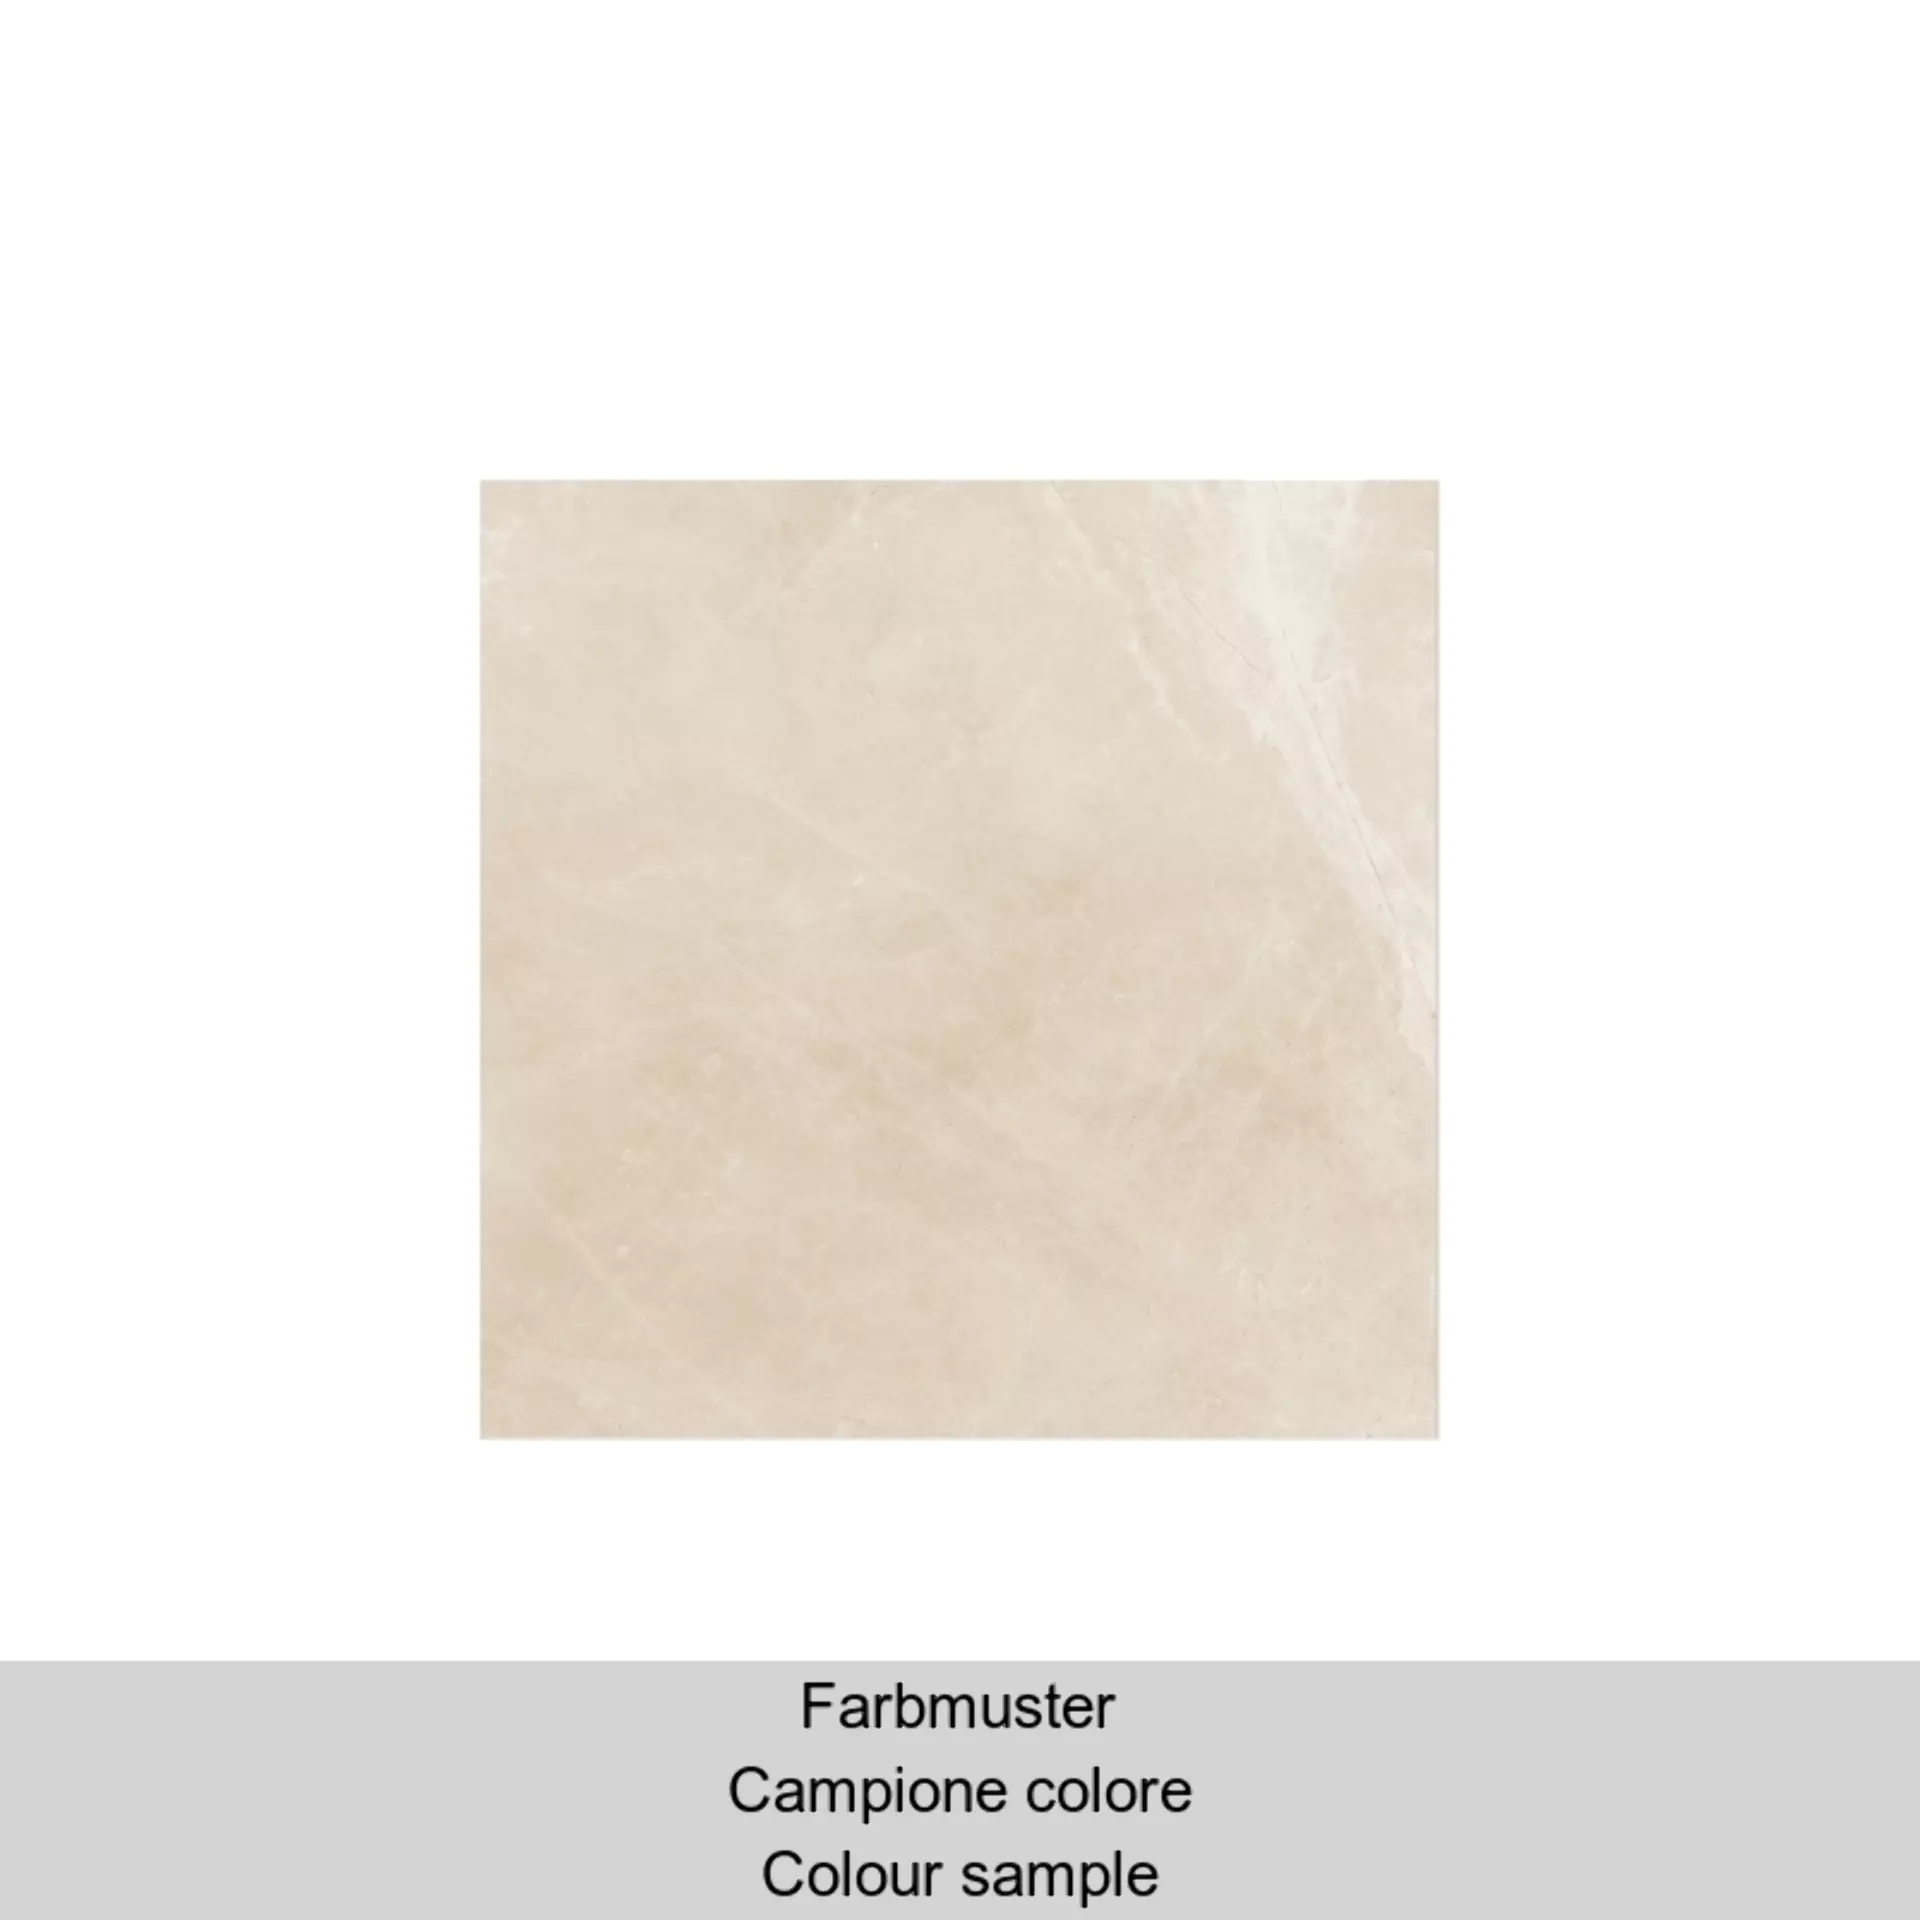 Supergres Purity Marbl Royal Beige Lux 60RX 60x60cm rectified 9mm